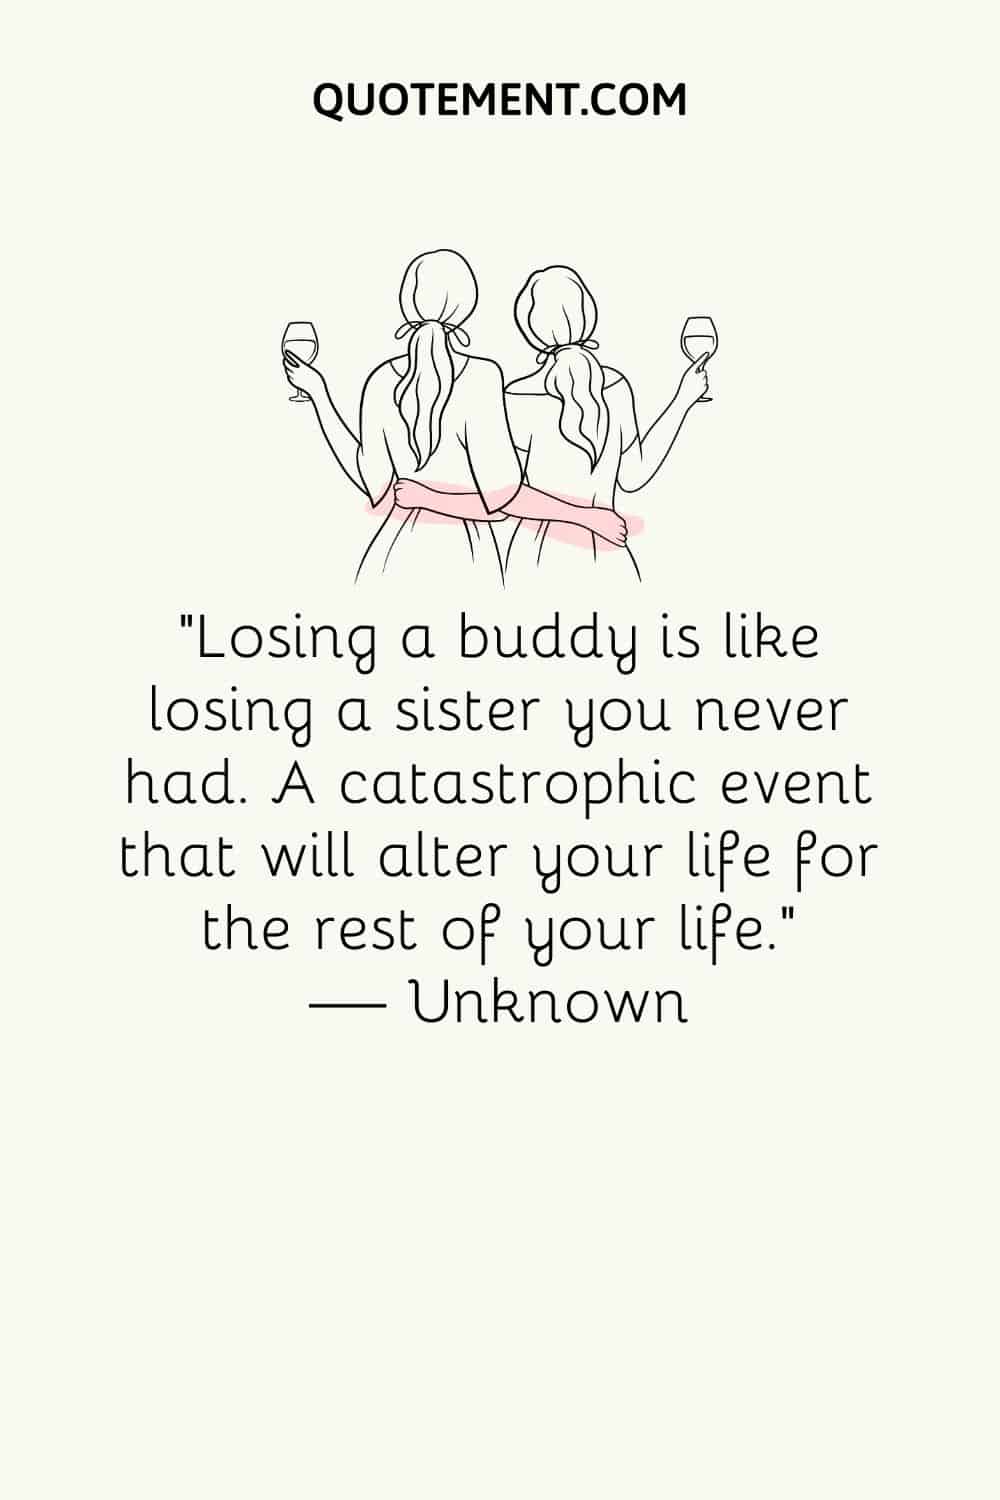 illustration of two hugged girls holding glasses representing losing a best friend quote